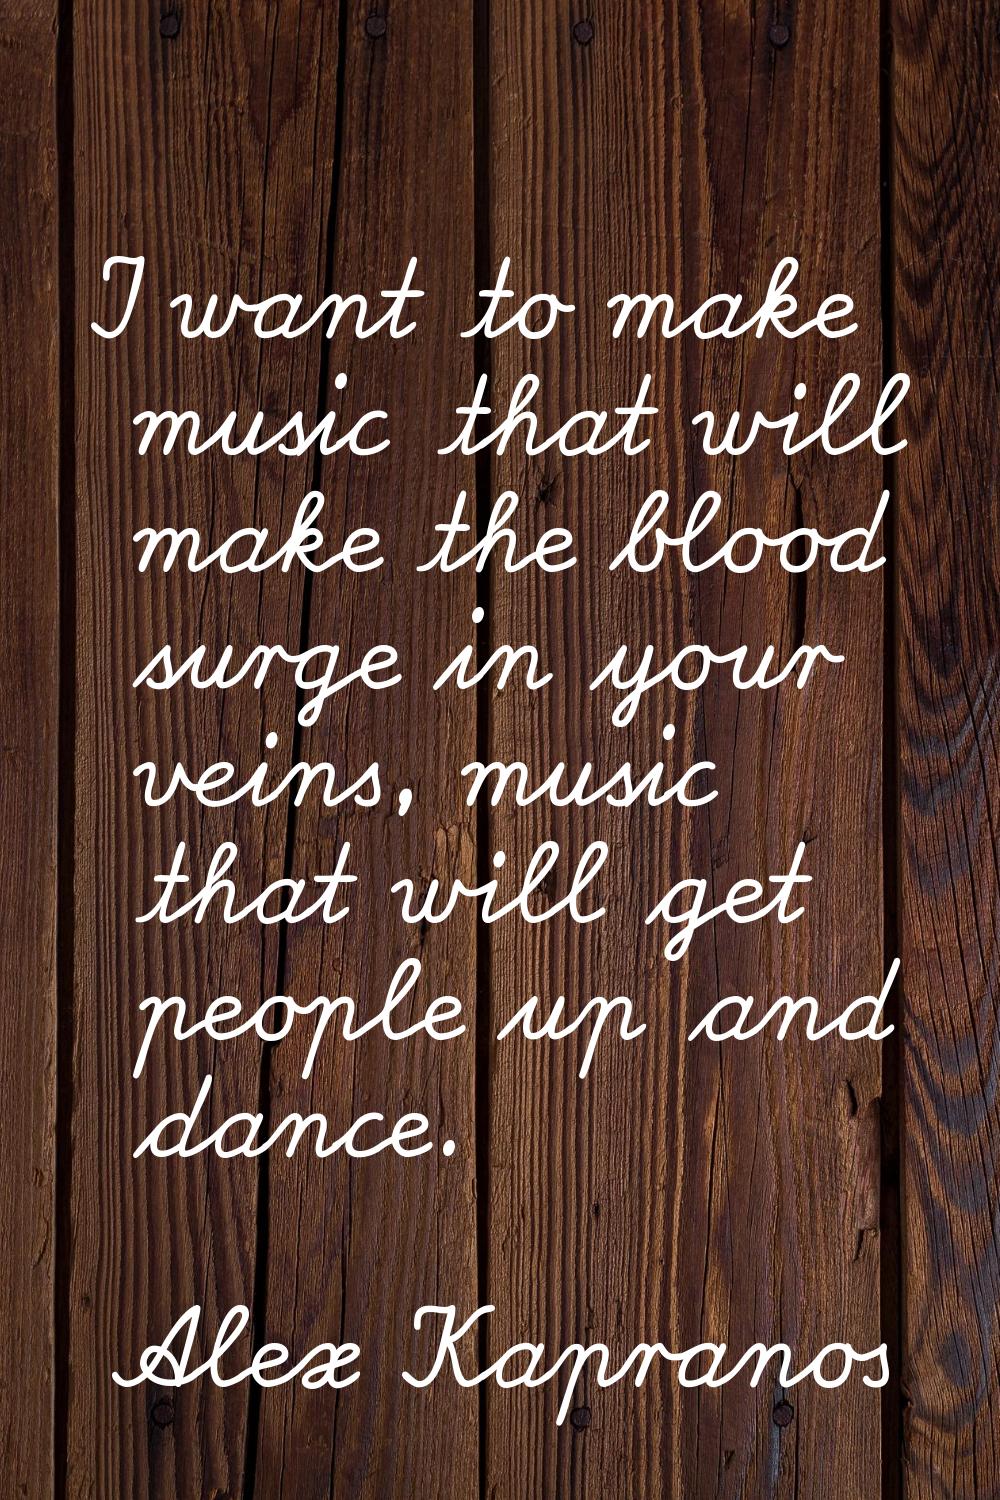 I want to make music that will make the blood surge in your veins, music that will get people up an